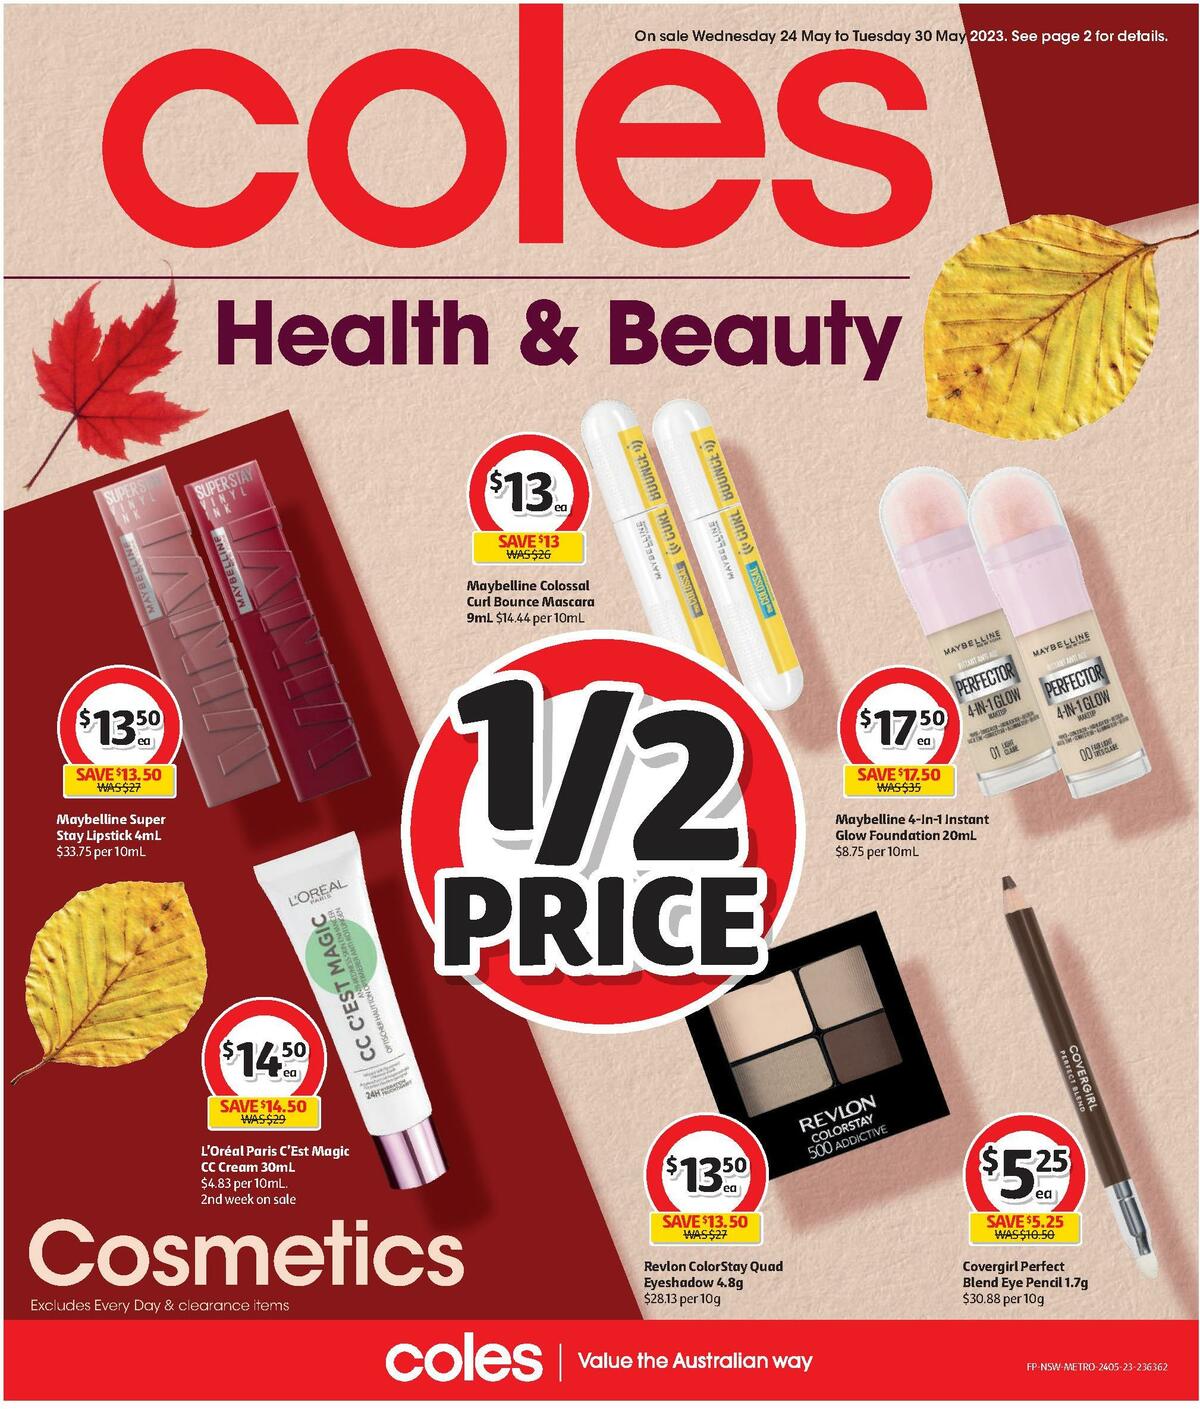 Coles Health & Beauty NSW METRO Catalogues from 24 May